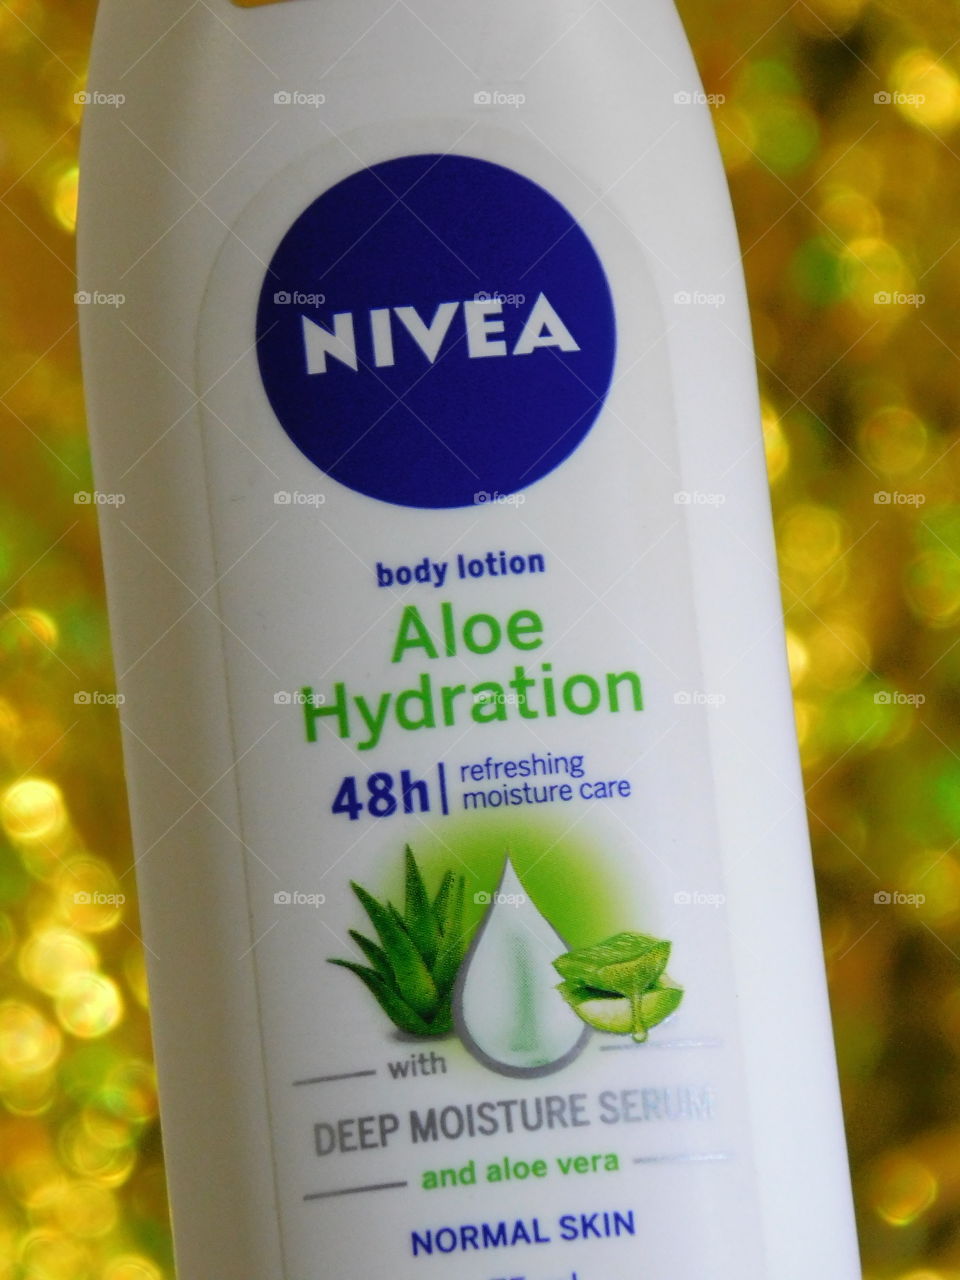 Nivea - Nivea Aloe hydration body lotion with deep moisture serum and aloe Vera for normal skin. It give your skin fast absorbing and refreshing moisturization and make it noticably smoother for the 48 hours.